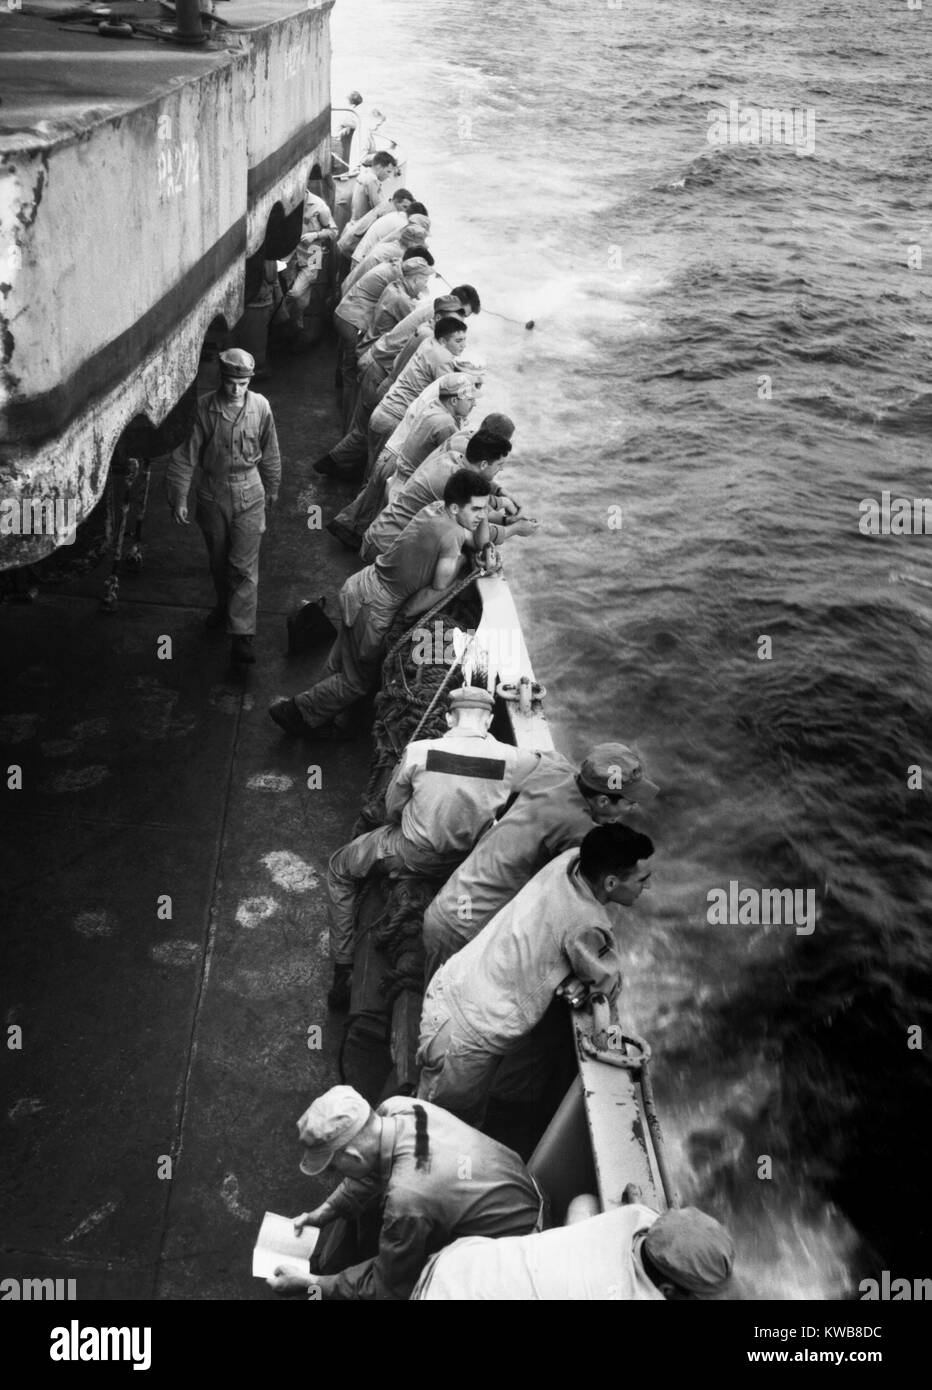 U.S. Marines stand along the rail of the USS Clymer taking them to Korea in late July, 1950. To the aft a Marine is washing his dungarees by dragging them along behind the ship. Korean War, 1950-53. (BSLOC 2014 11 11) Stock Photo